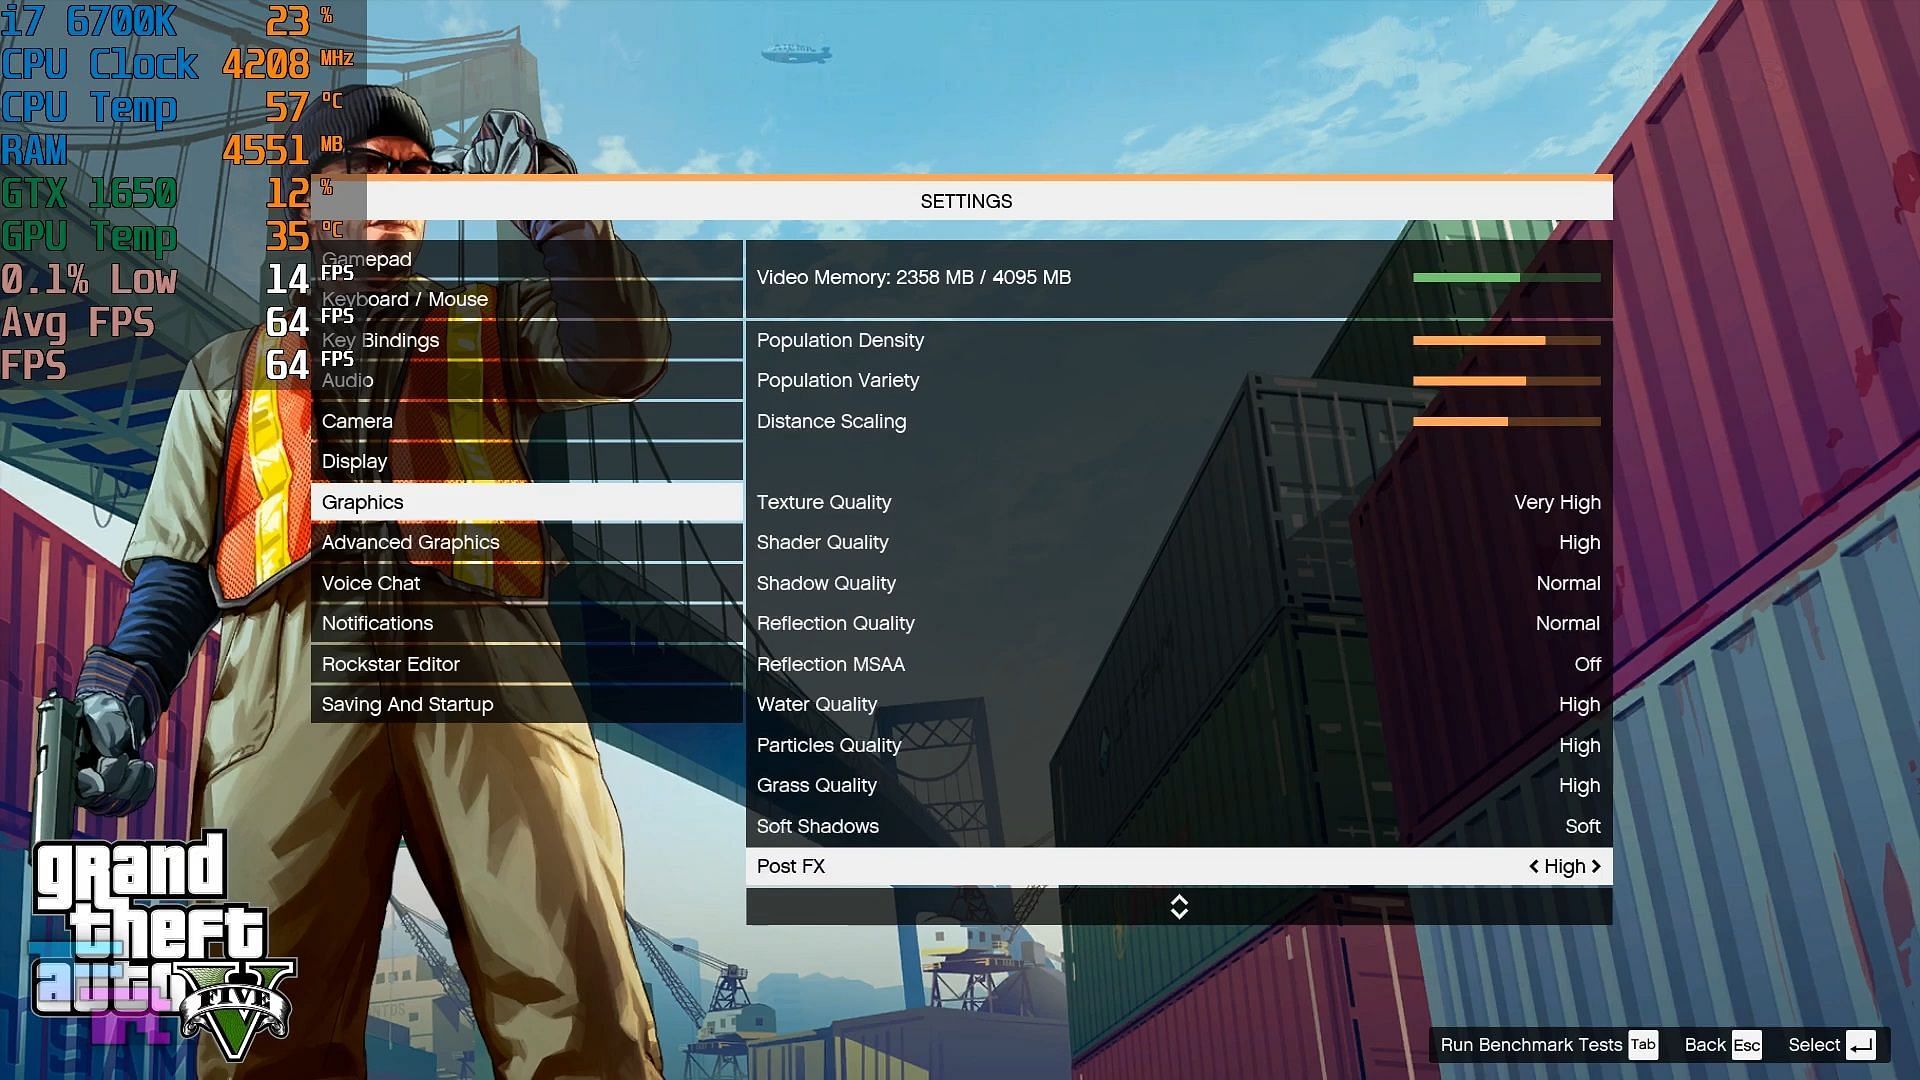 Graphics settings page 2 (Image via FrameRated, YouTube)